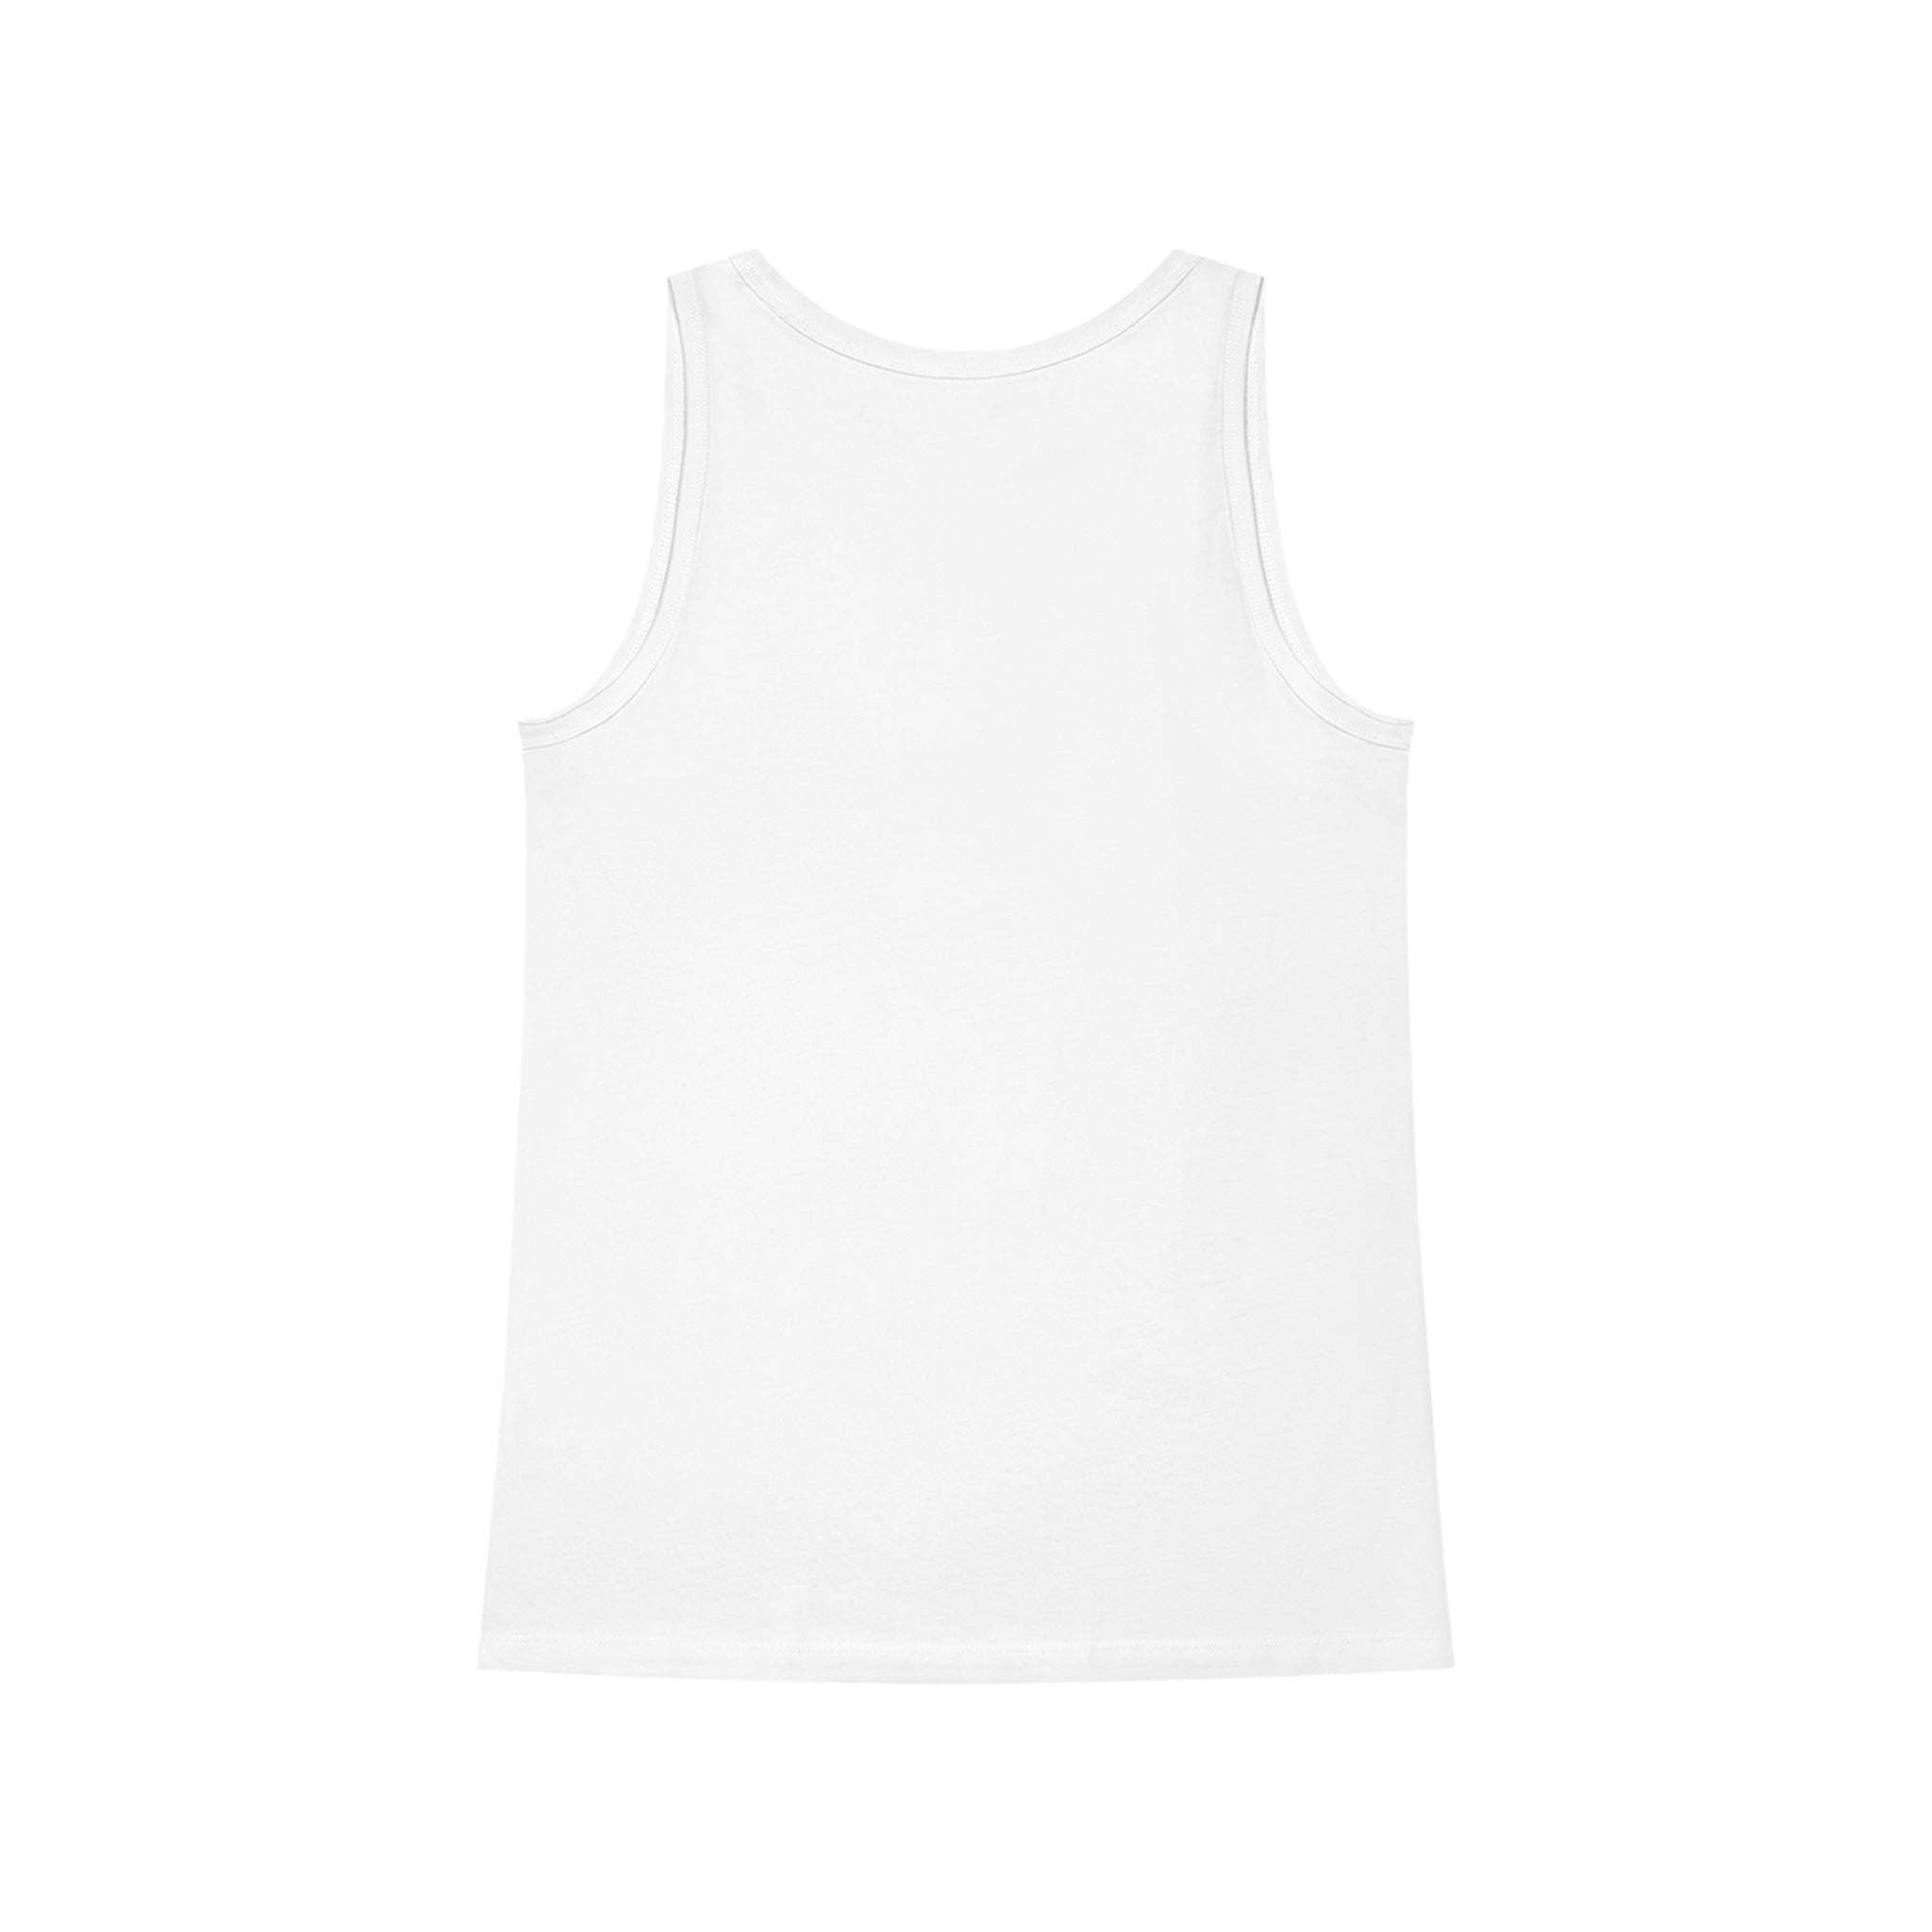 A lightweight Flowers Tank Top made of organic cotton, perfect for its breathable design and versatile on a white background.